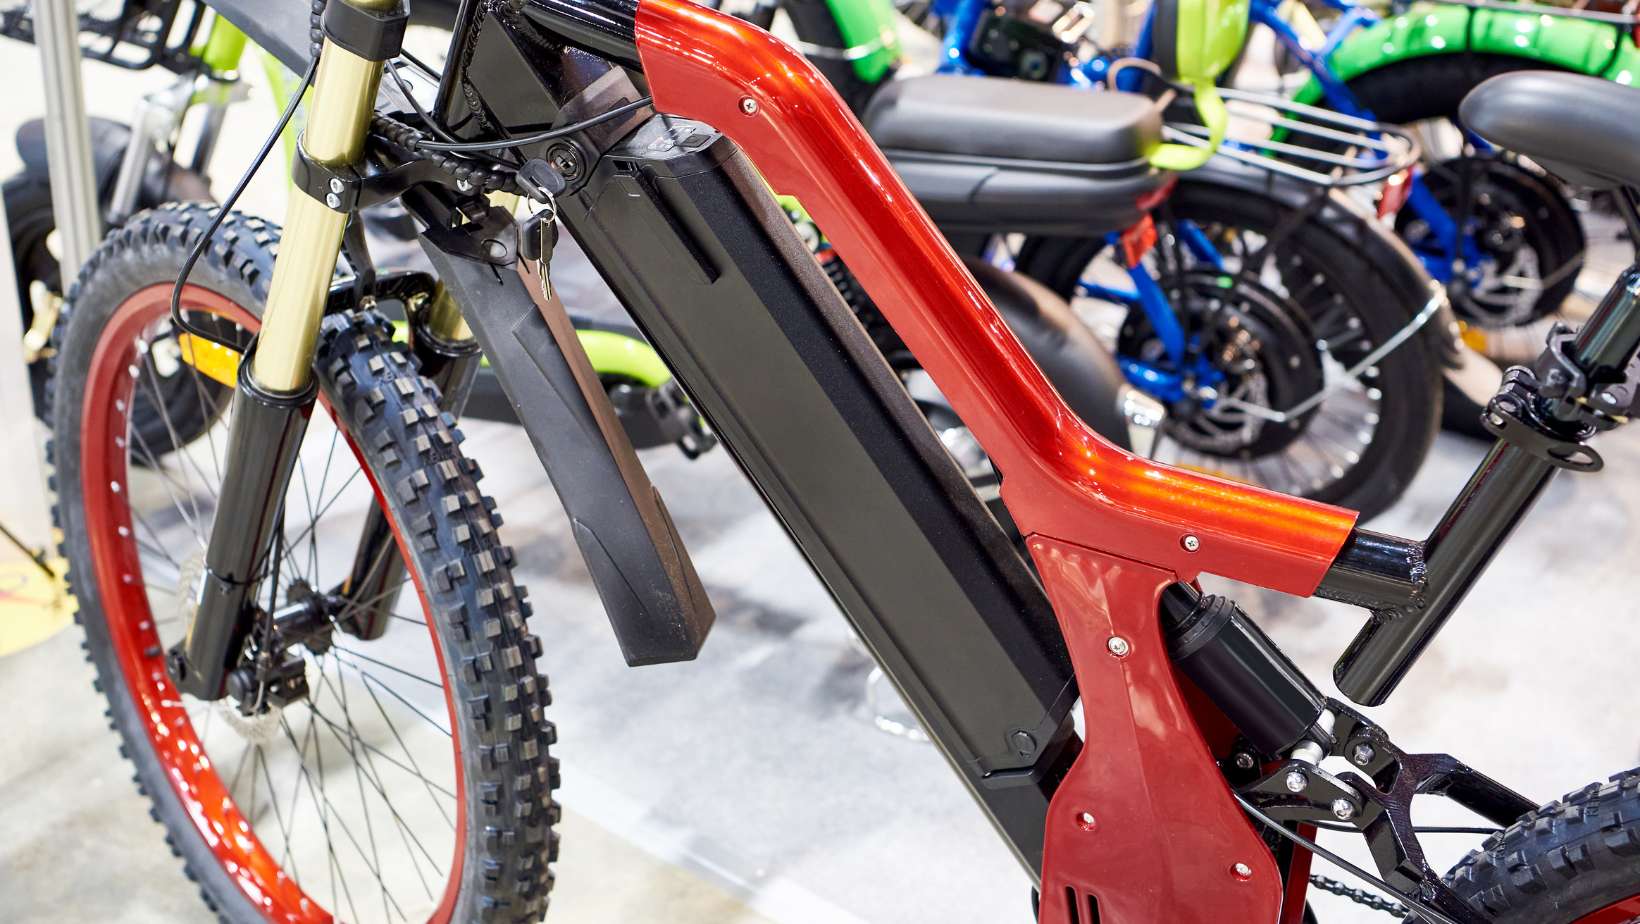 How Much Do Electric Bikes Cost?